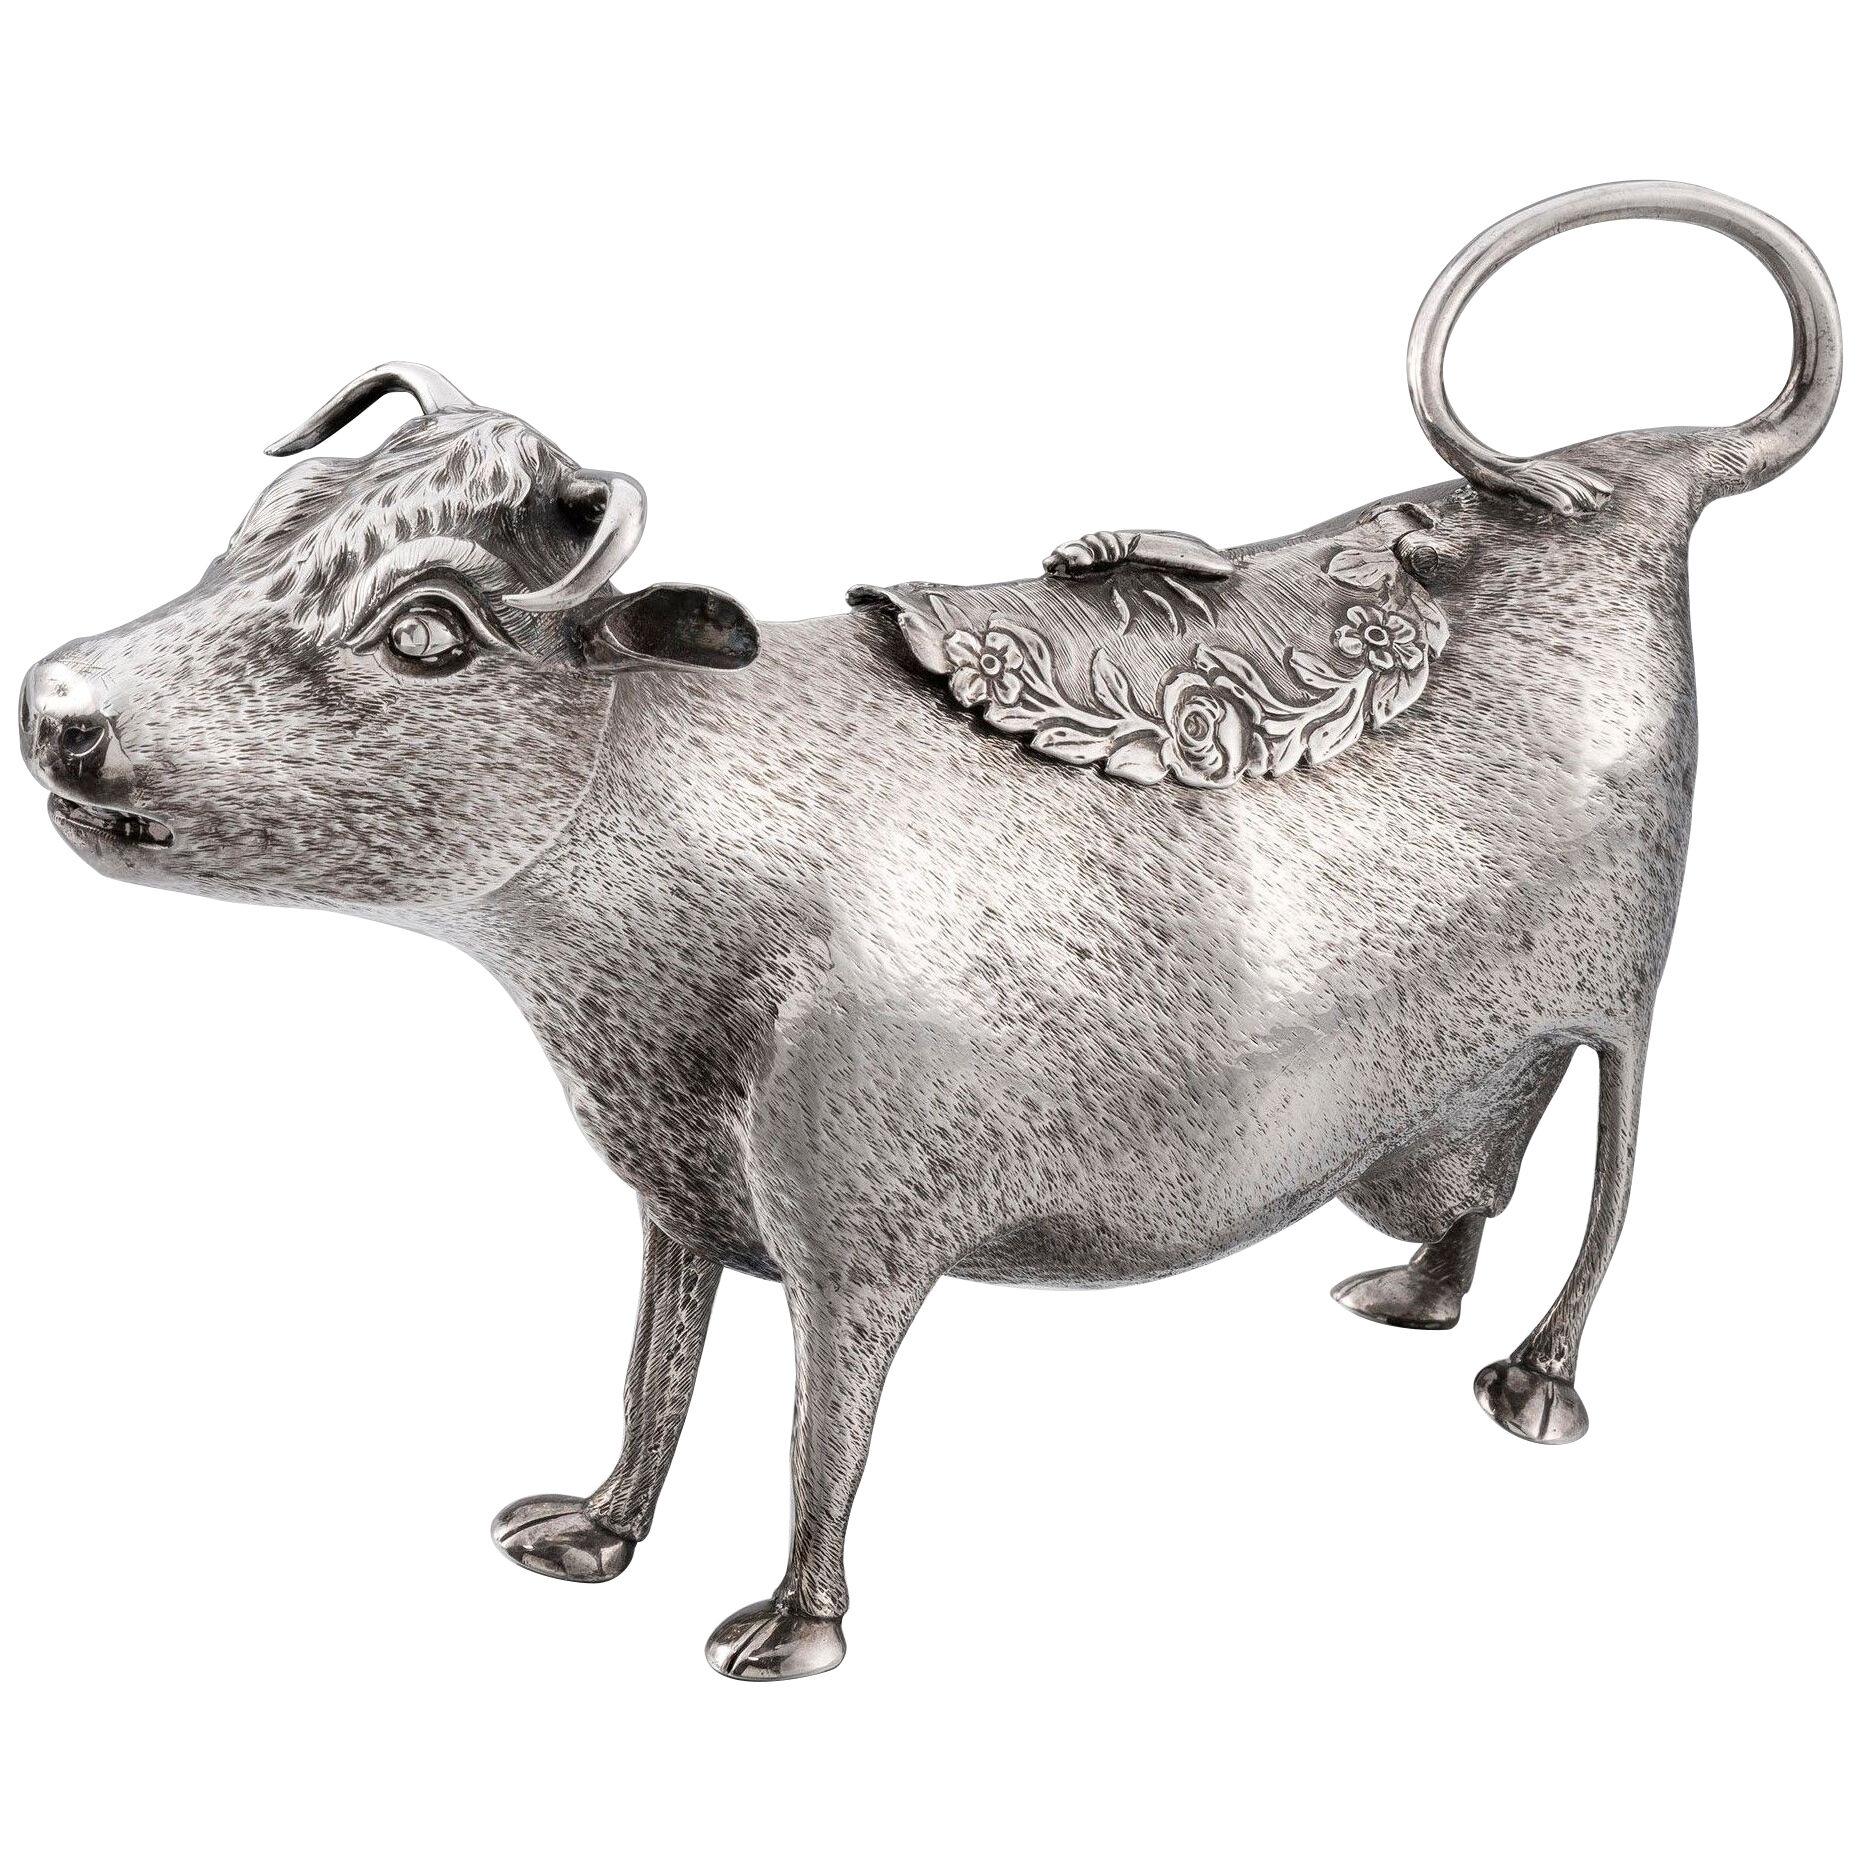 A Naturalistically Modelled Cow Creamer